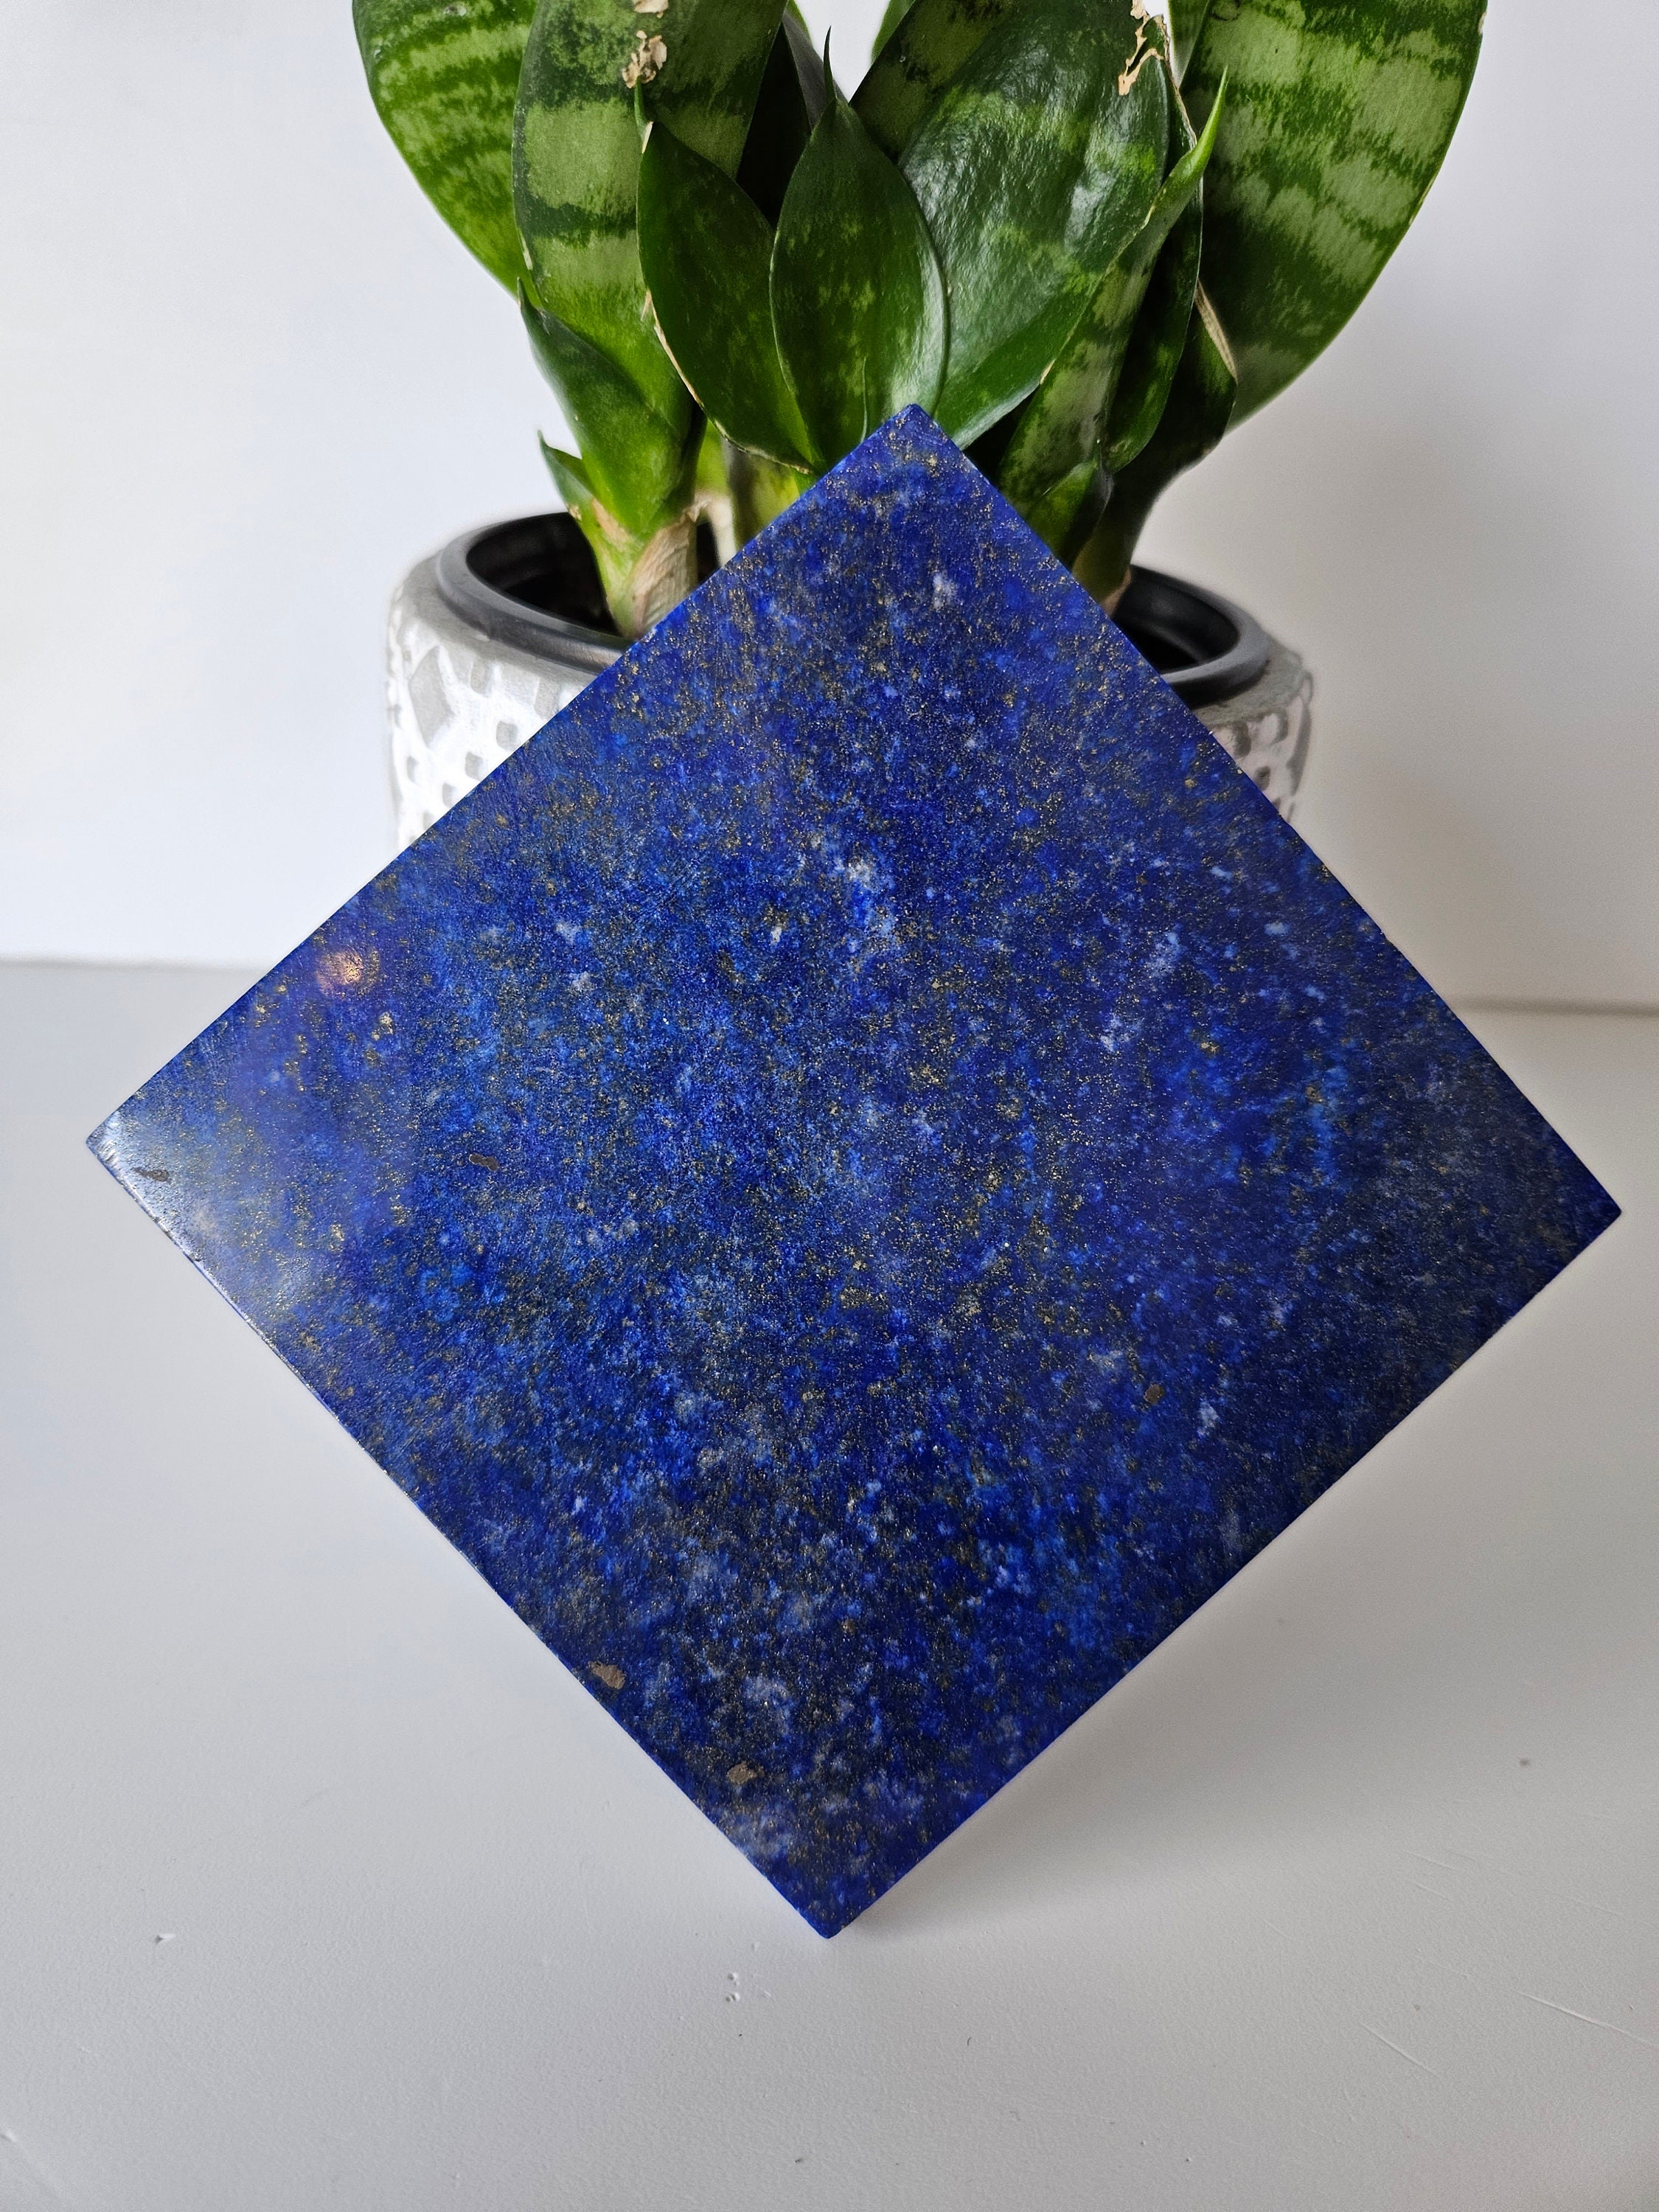 10x10 cm Stone Sided Tile | A+++ Lapis Lazuli, Desk Accessories, Pyrite slab, Femininity, Metaphysical stone, Crystal Gifts, Grounding